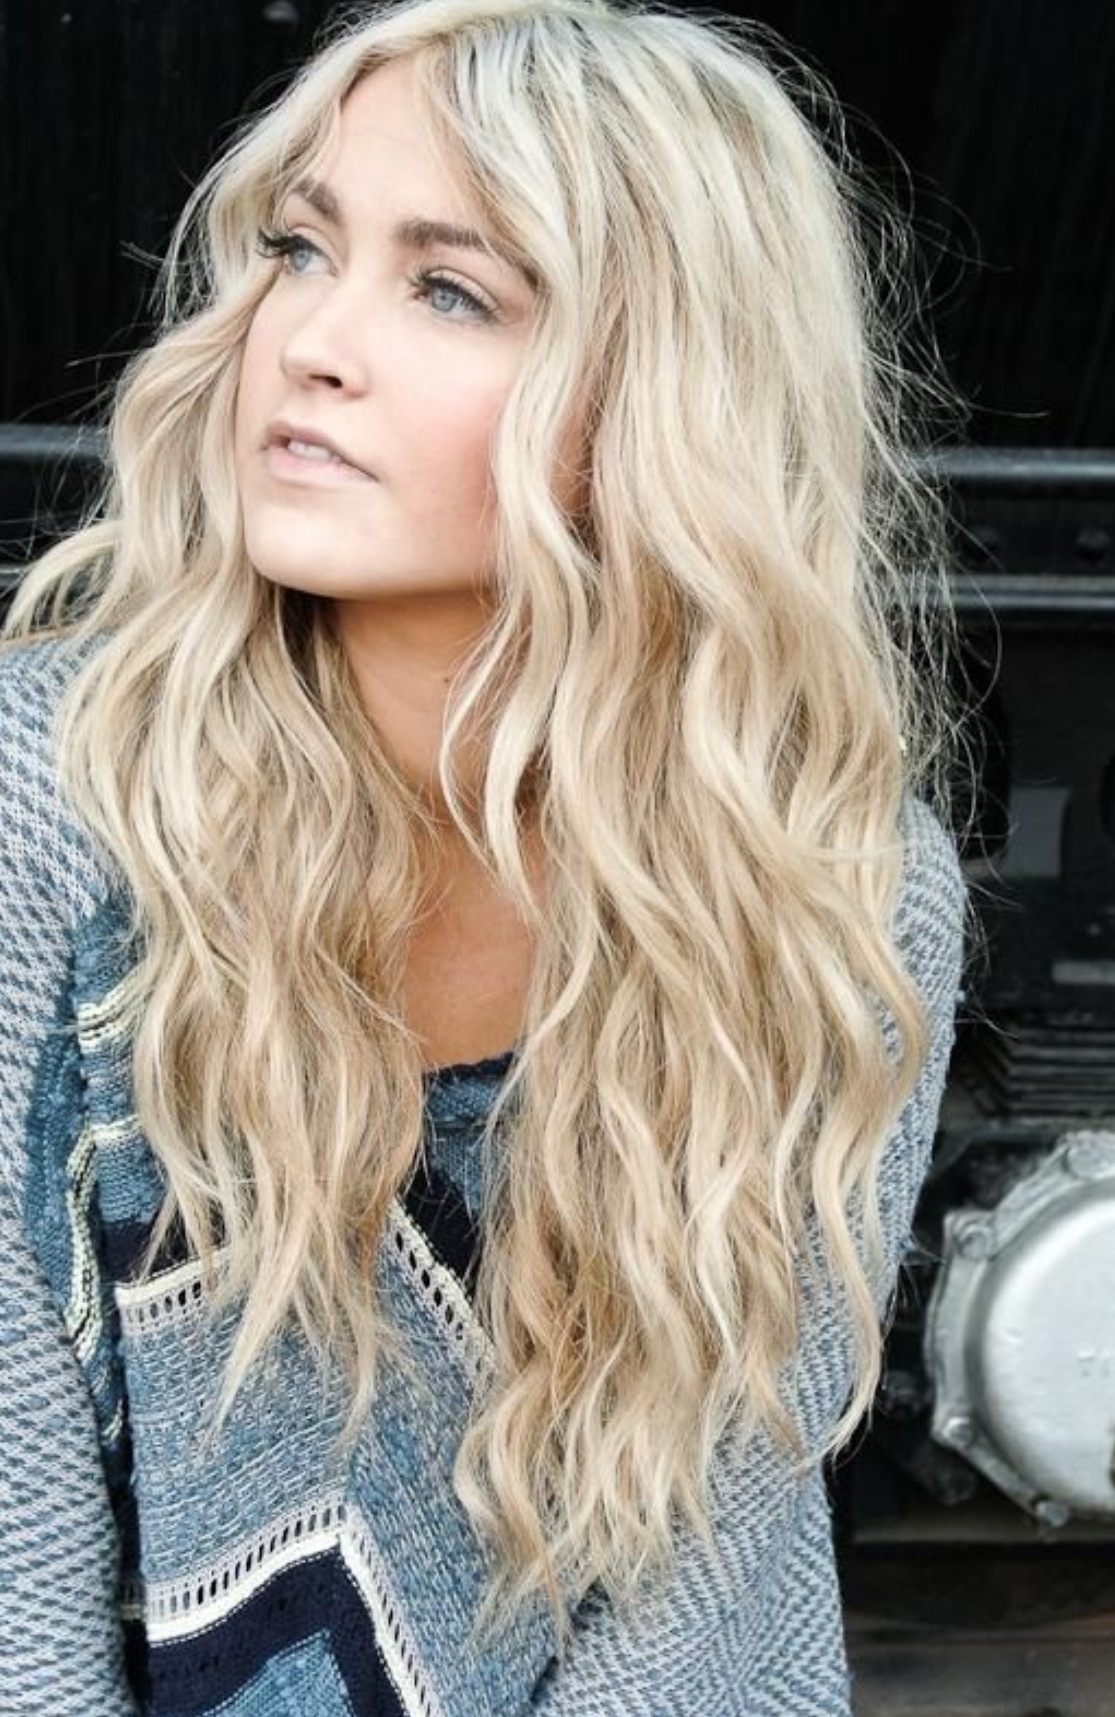 Lace Front Cap Human Hair Wavy 120% 30 Inches Wigs - Blonde